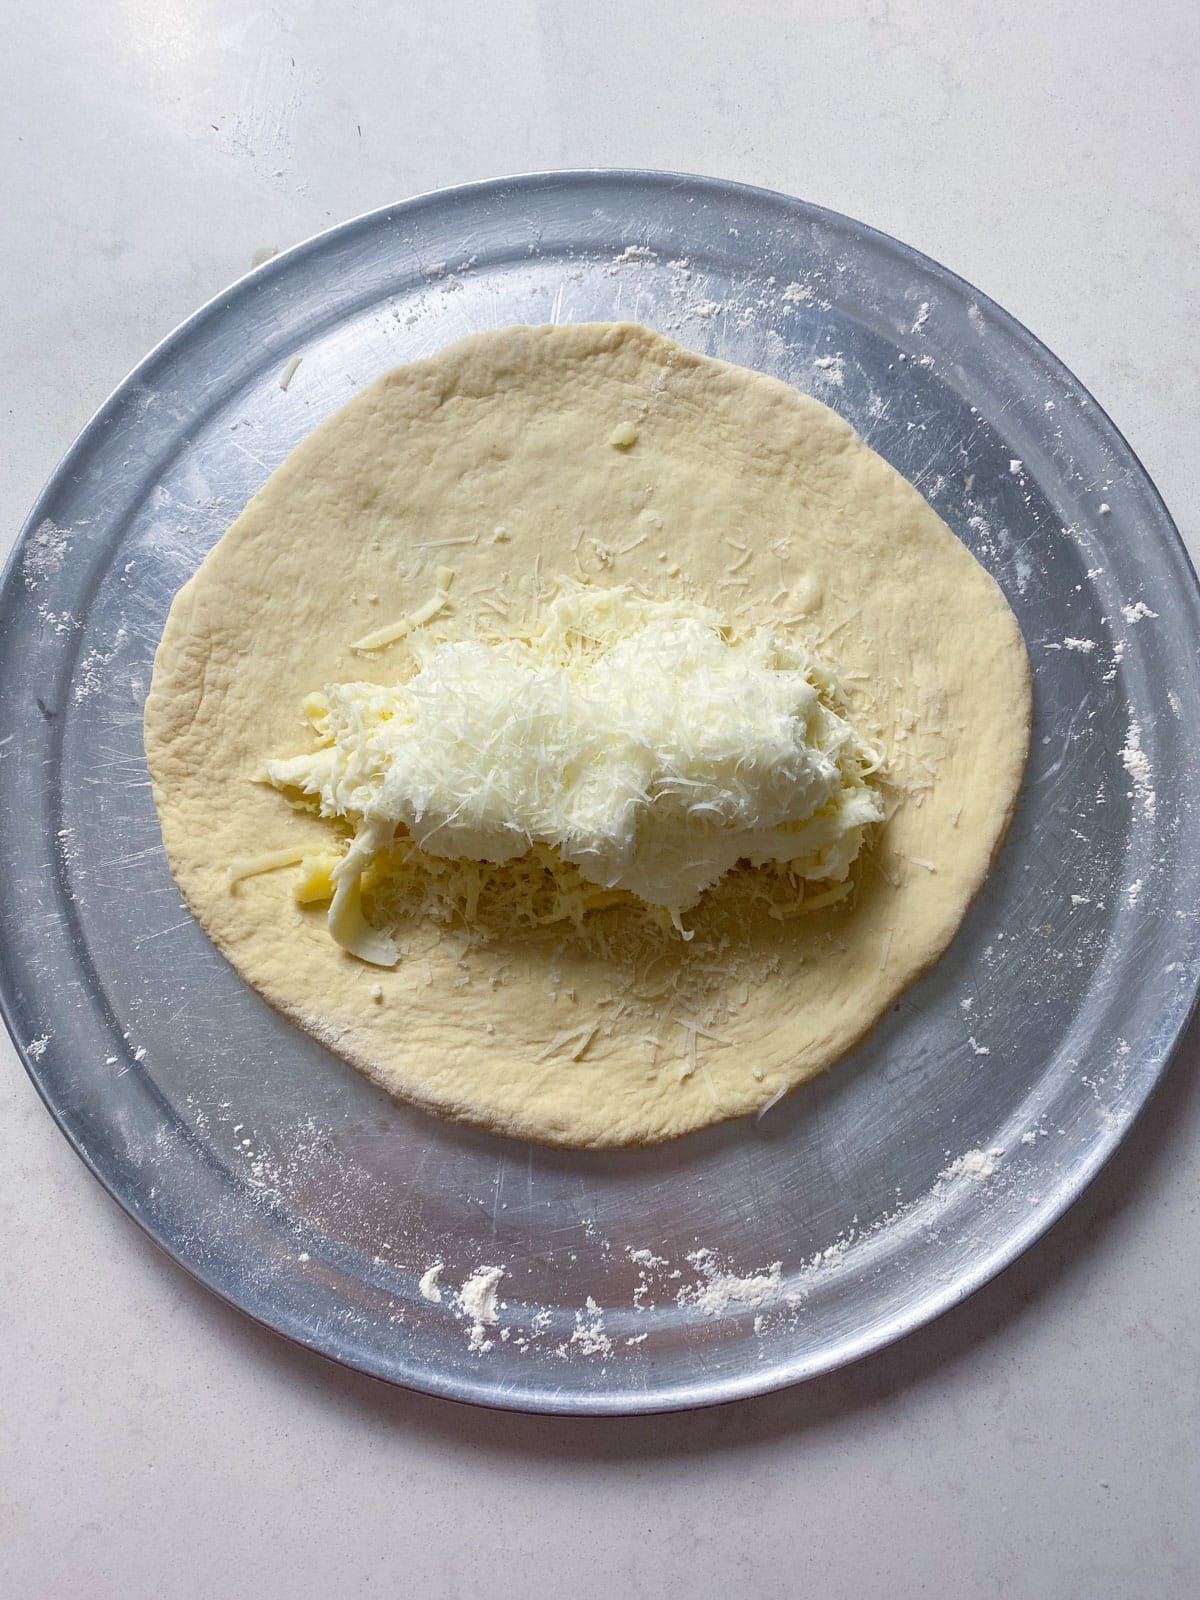 Once the pizza dough is stretched out, layer the four cheeses towards the lower center of the dough.